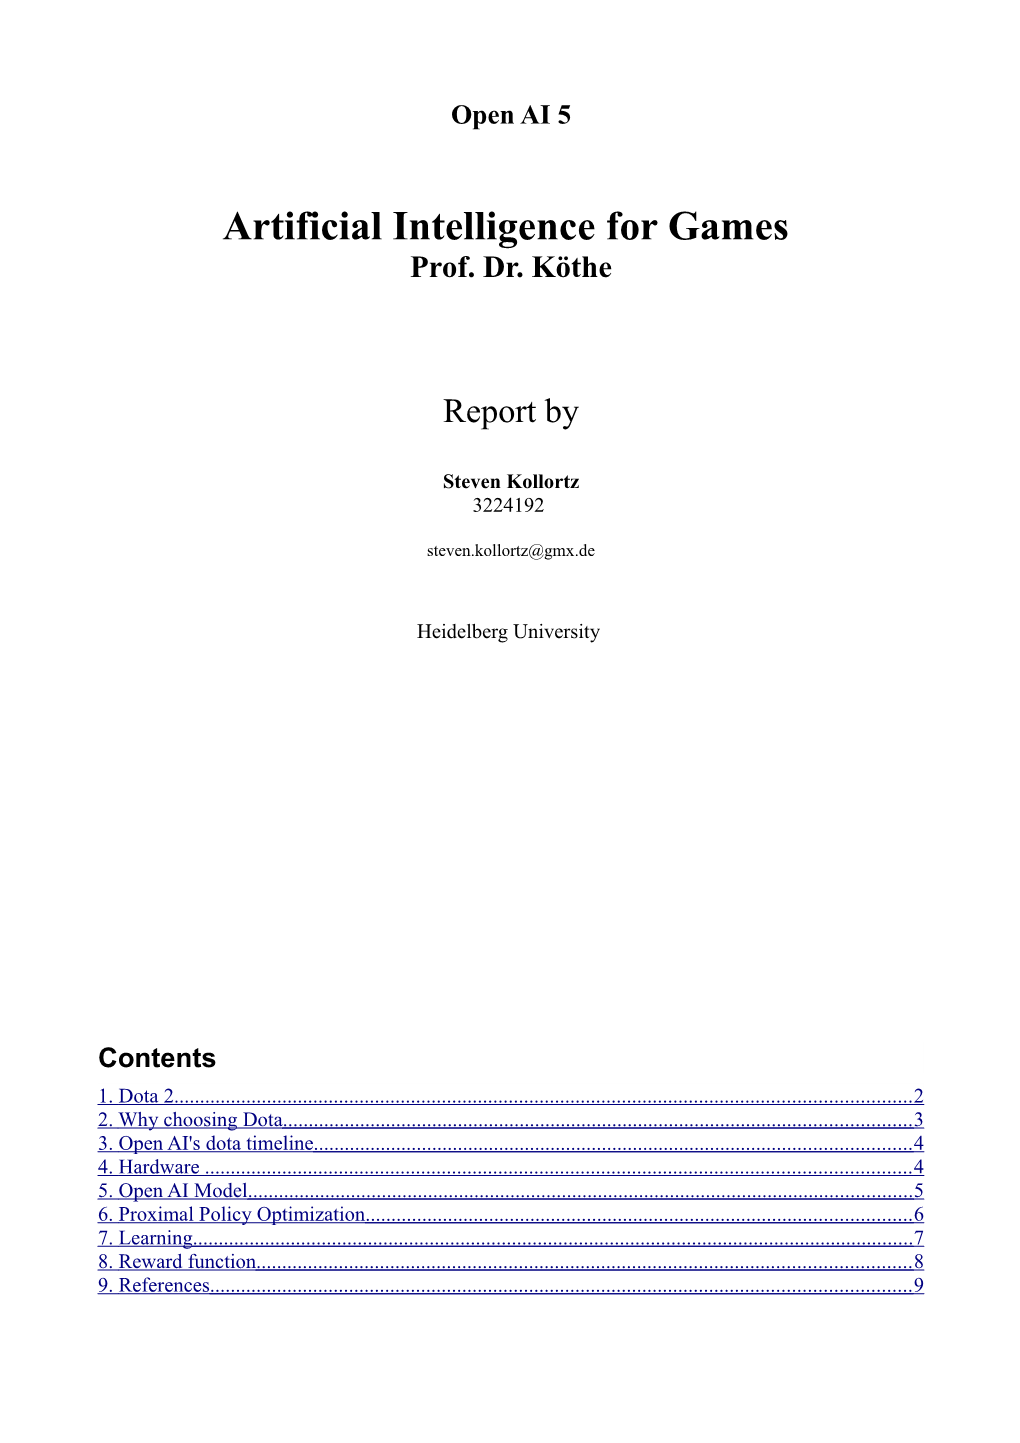 Artificial Intelligence for Games Prof